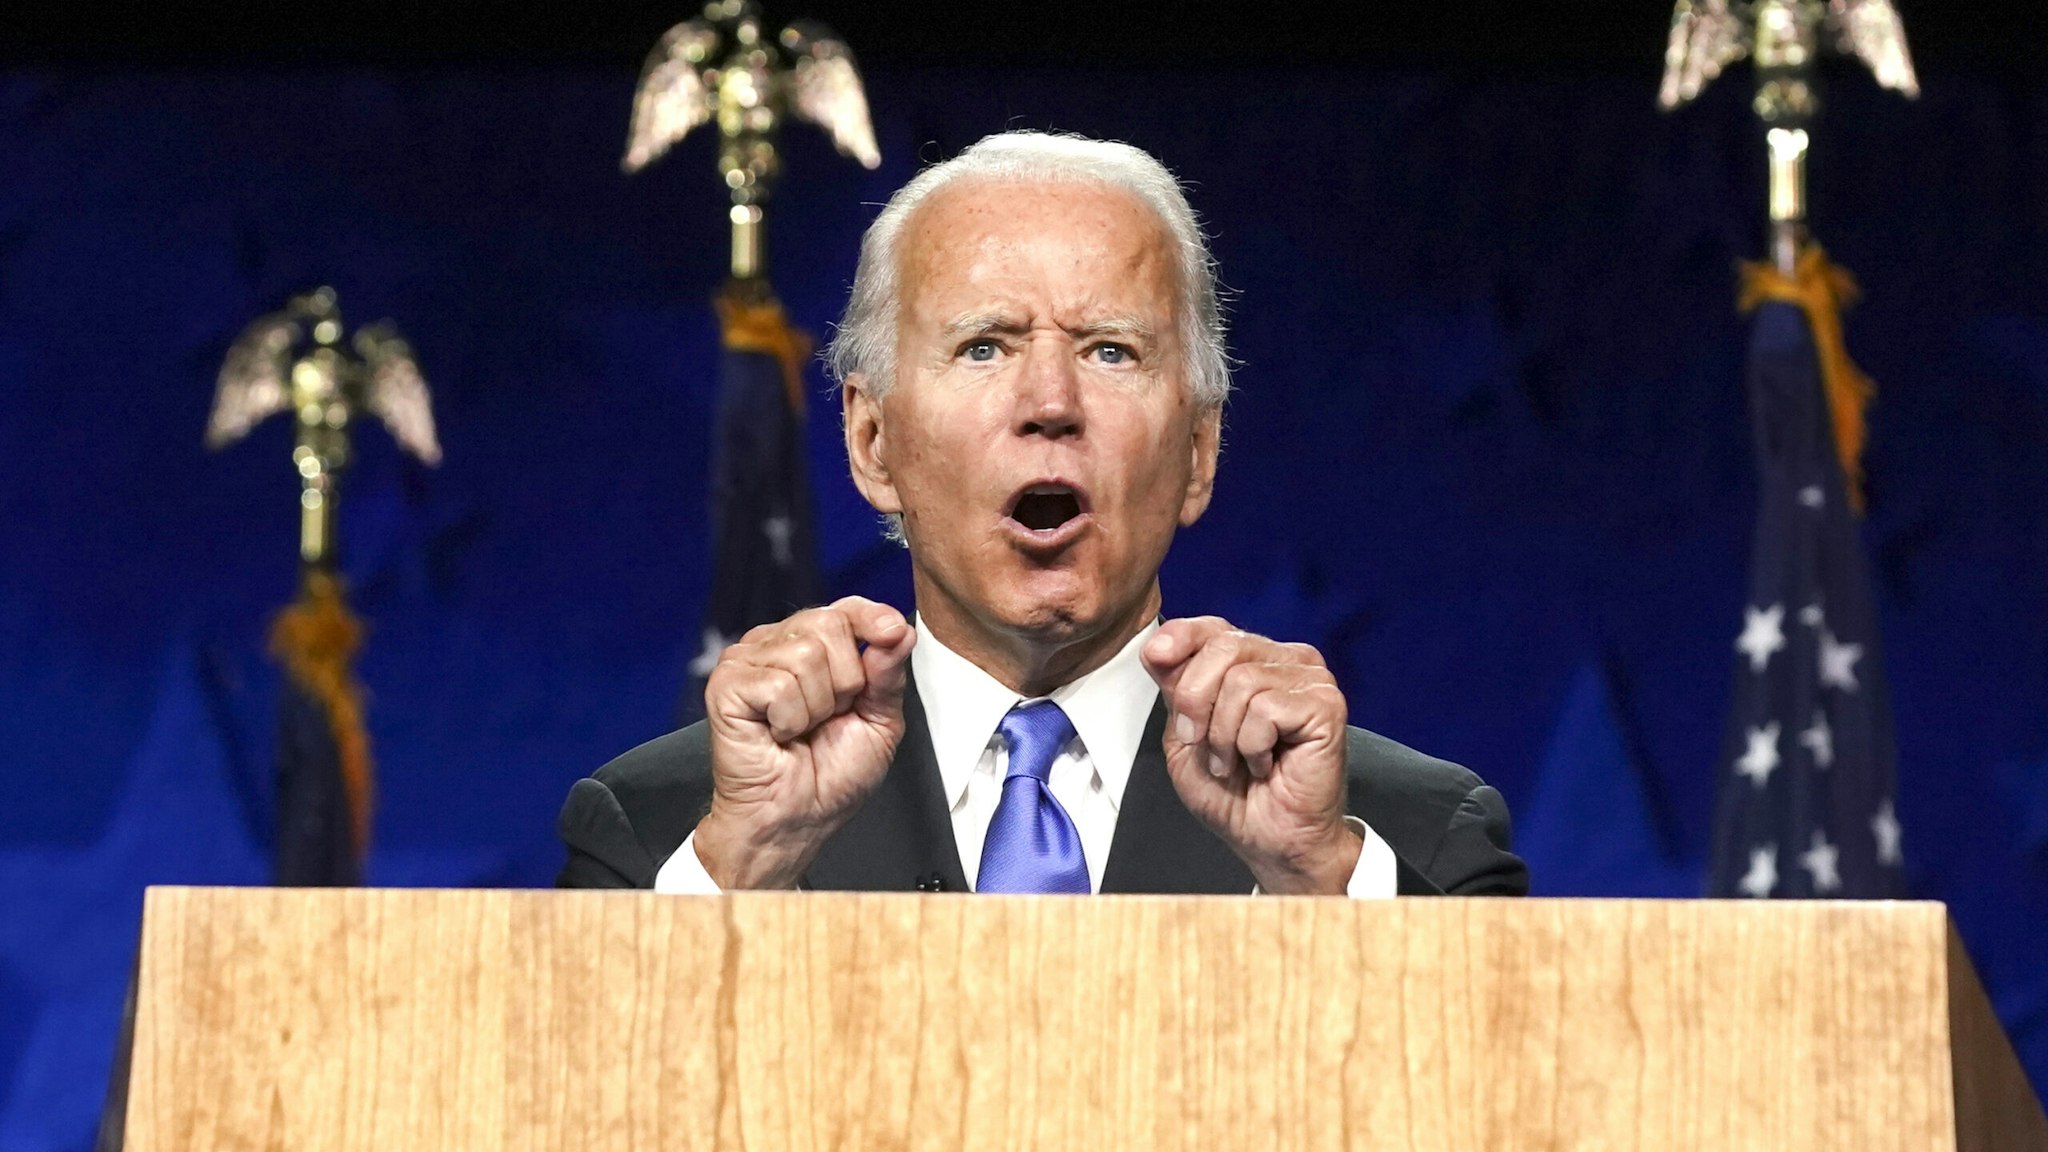 Former Vice President Joe Biden, Democratic presidential nominee, speaks during the Democratic National Convention at the Chase Center in Wilmington, Delaware, U.S., on Thursday, Aug. 20, 2020. Biden accepted the Democratic nomination to challenge President Donald Trump, urging Americans in a prime-time address to vote for new national leadership that will overcome deep U.S. political divisions.